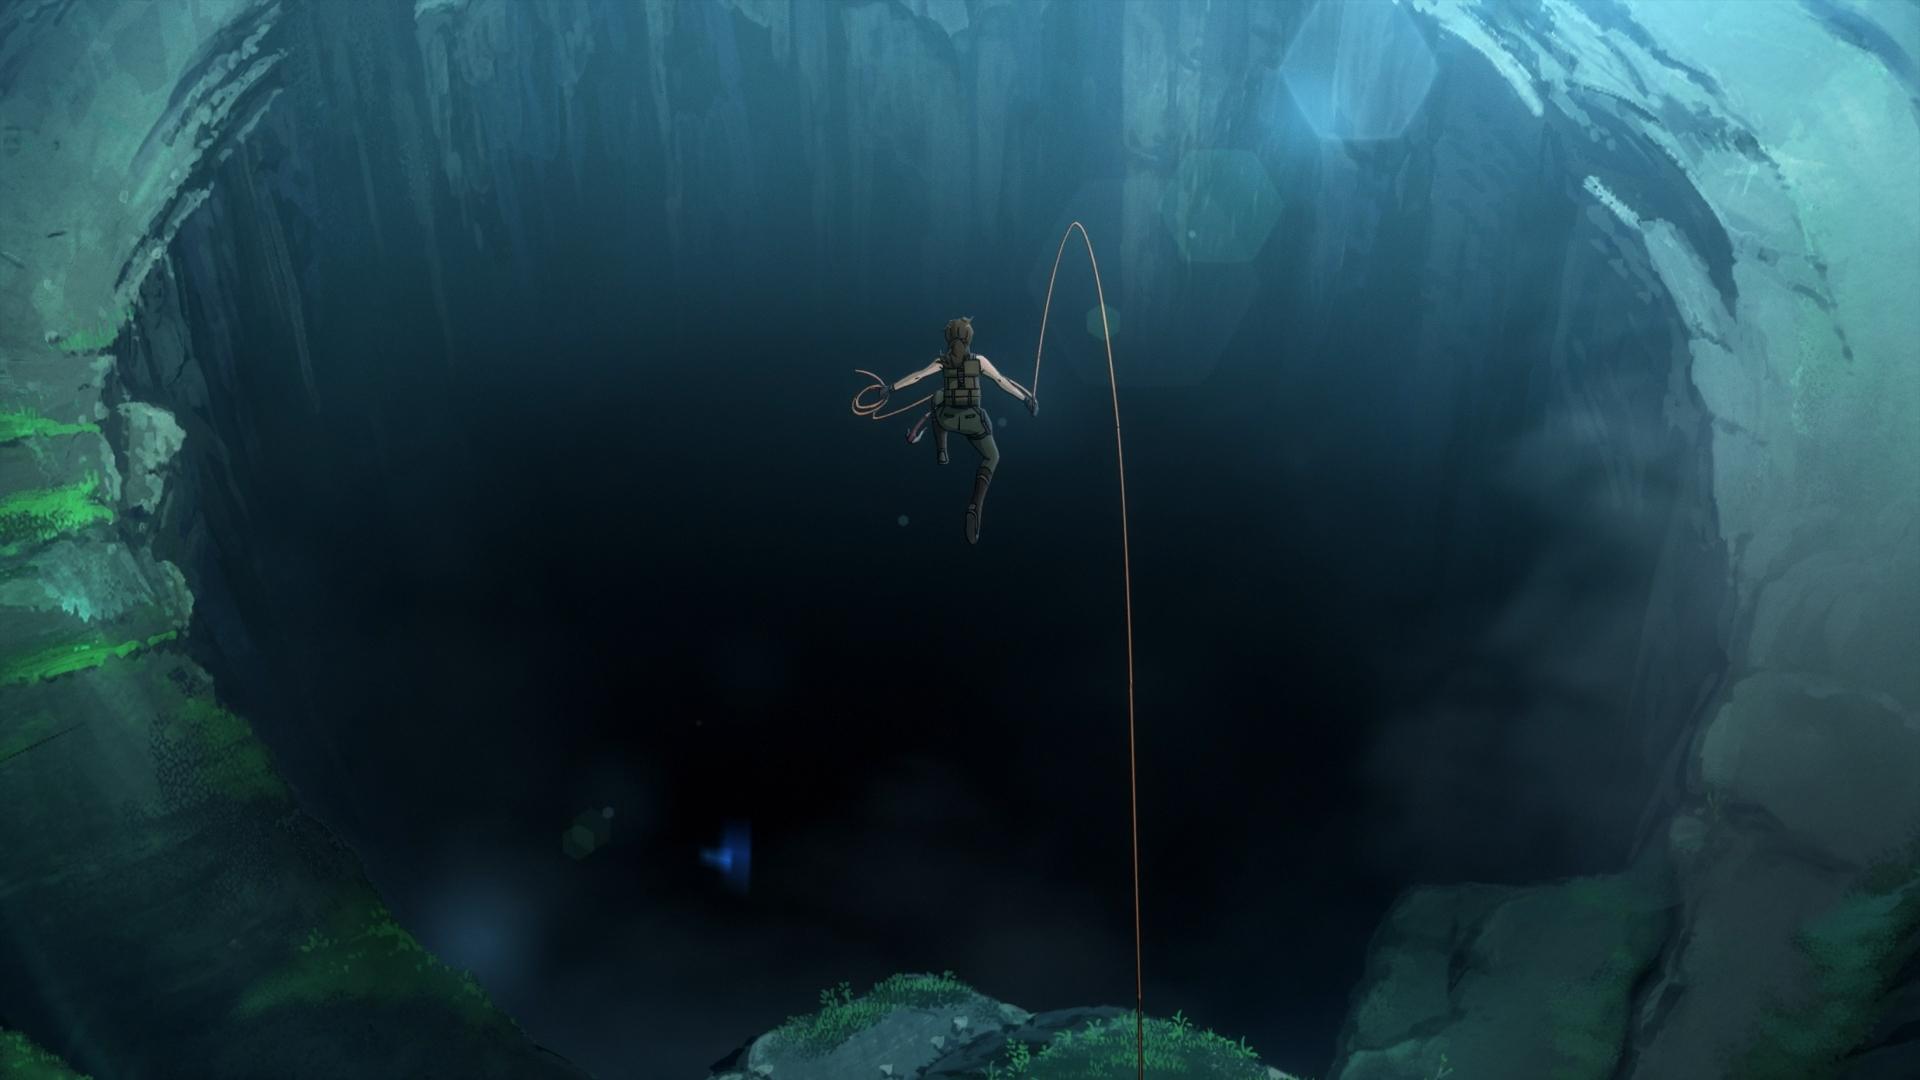 Action scene of Lara Croft rappelling into a vast cavern illuminated by a faint light from above.